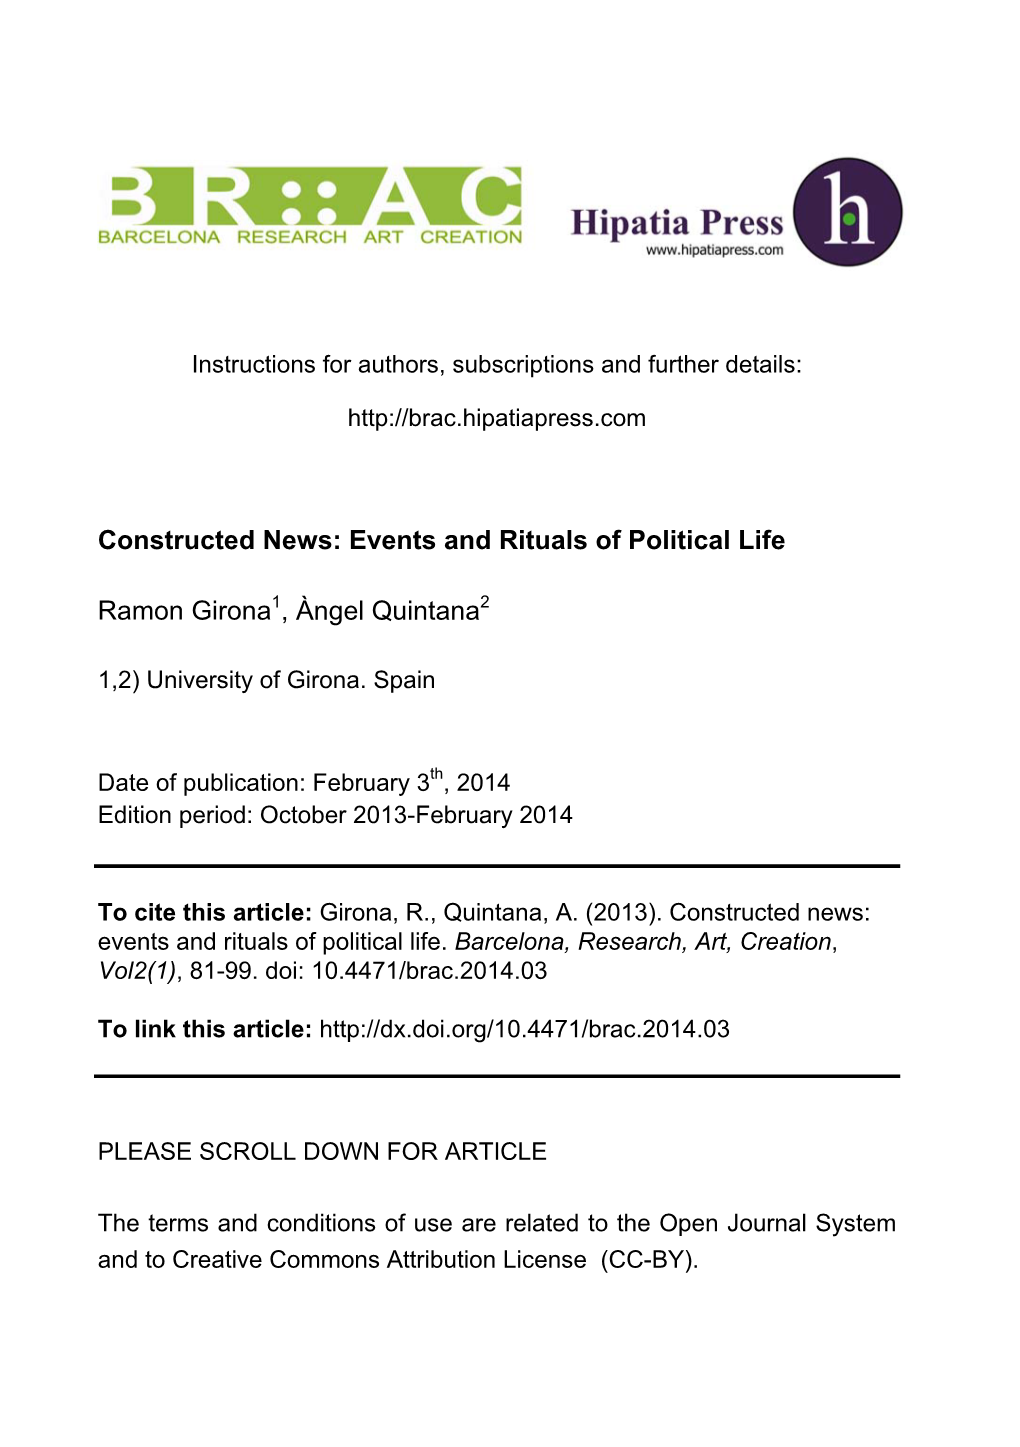 Constructed News: Events and Rituals of Political Life